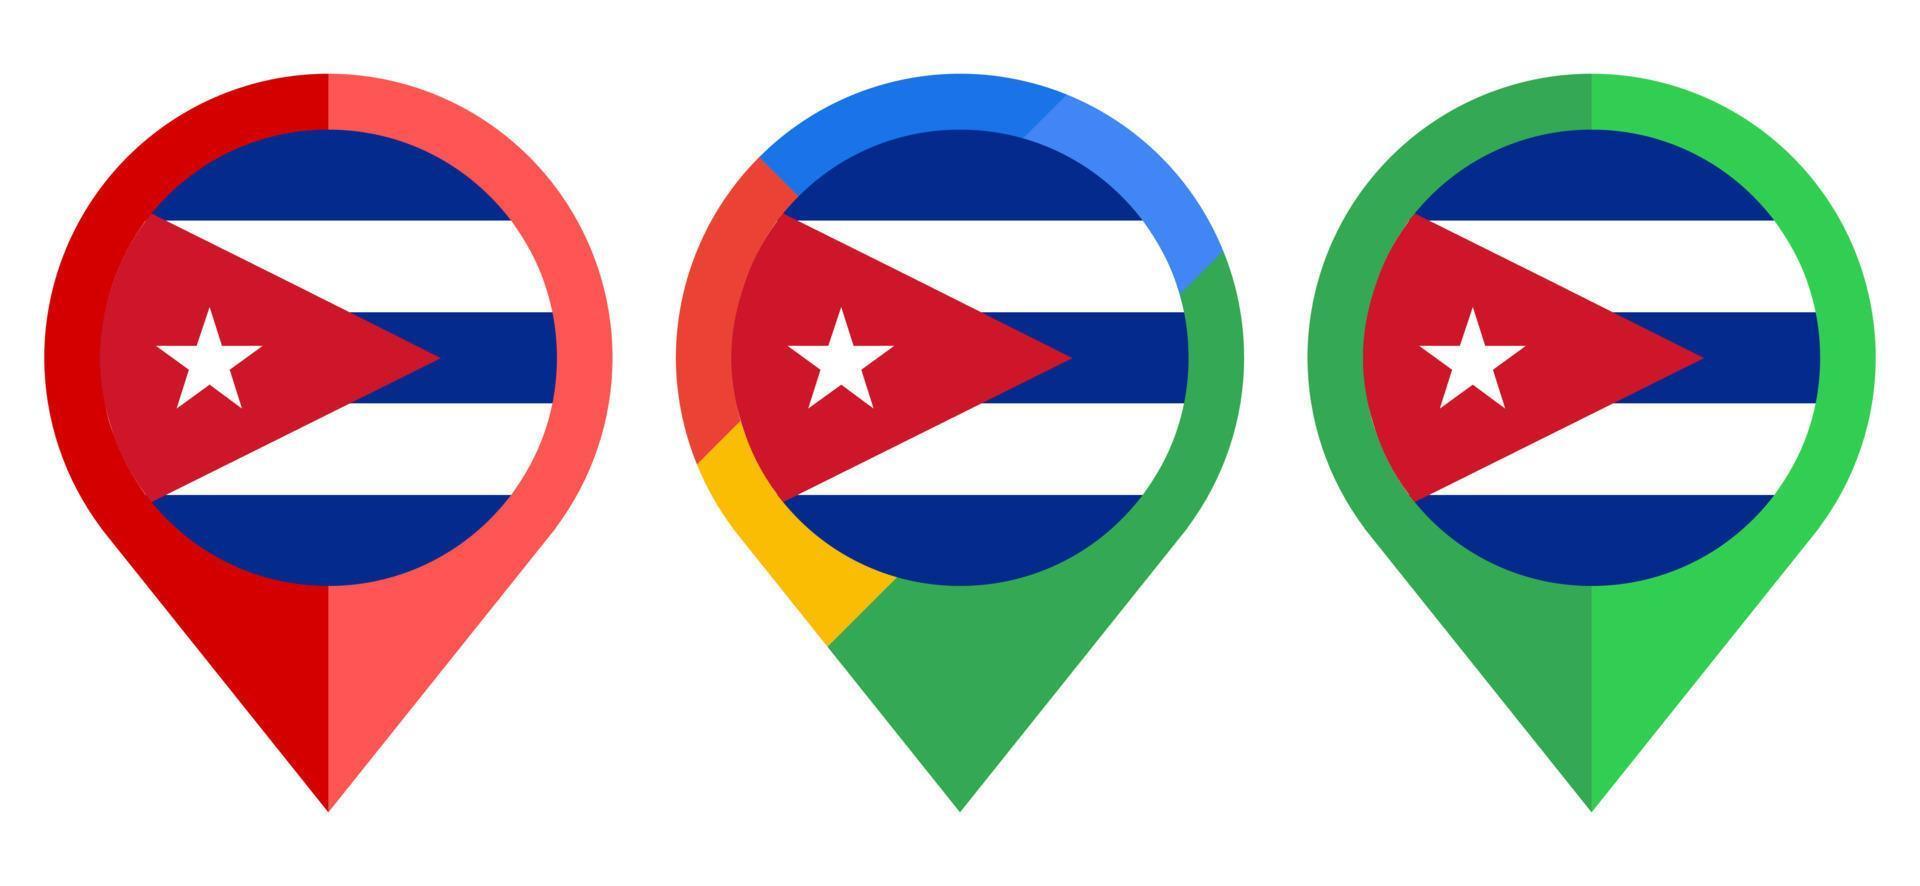 flat map marker icon with cuba flag isolated on white background vector